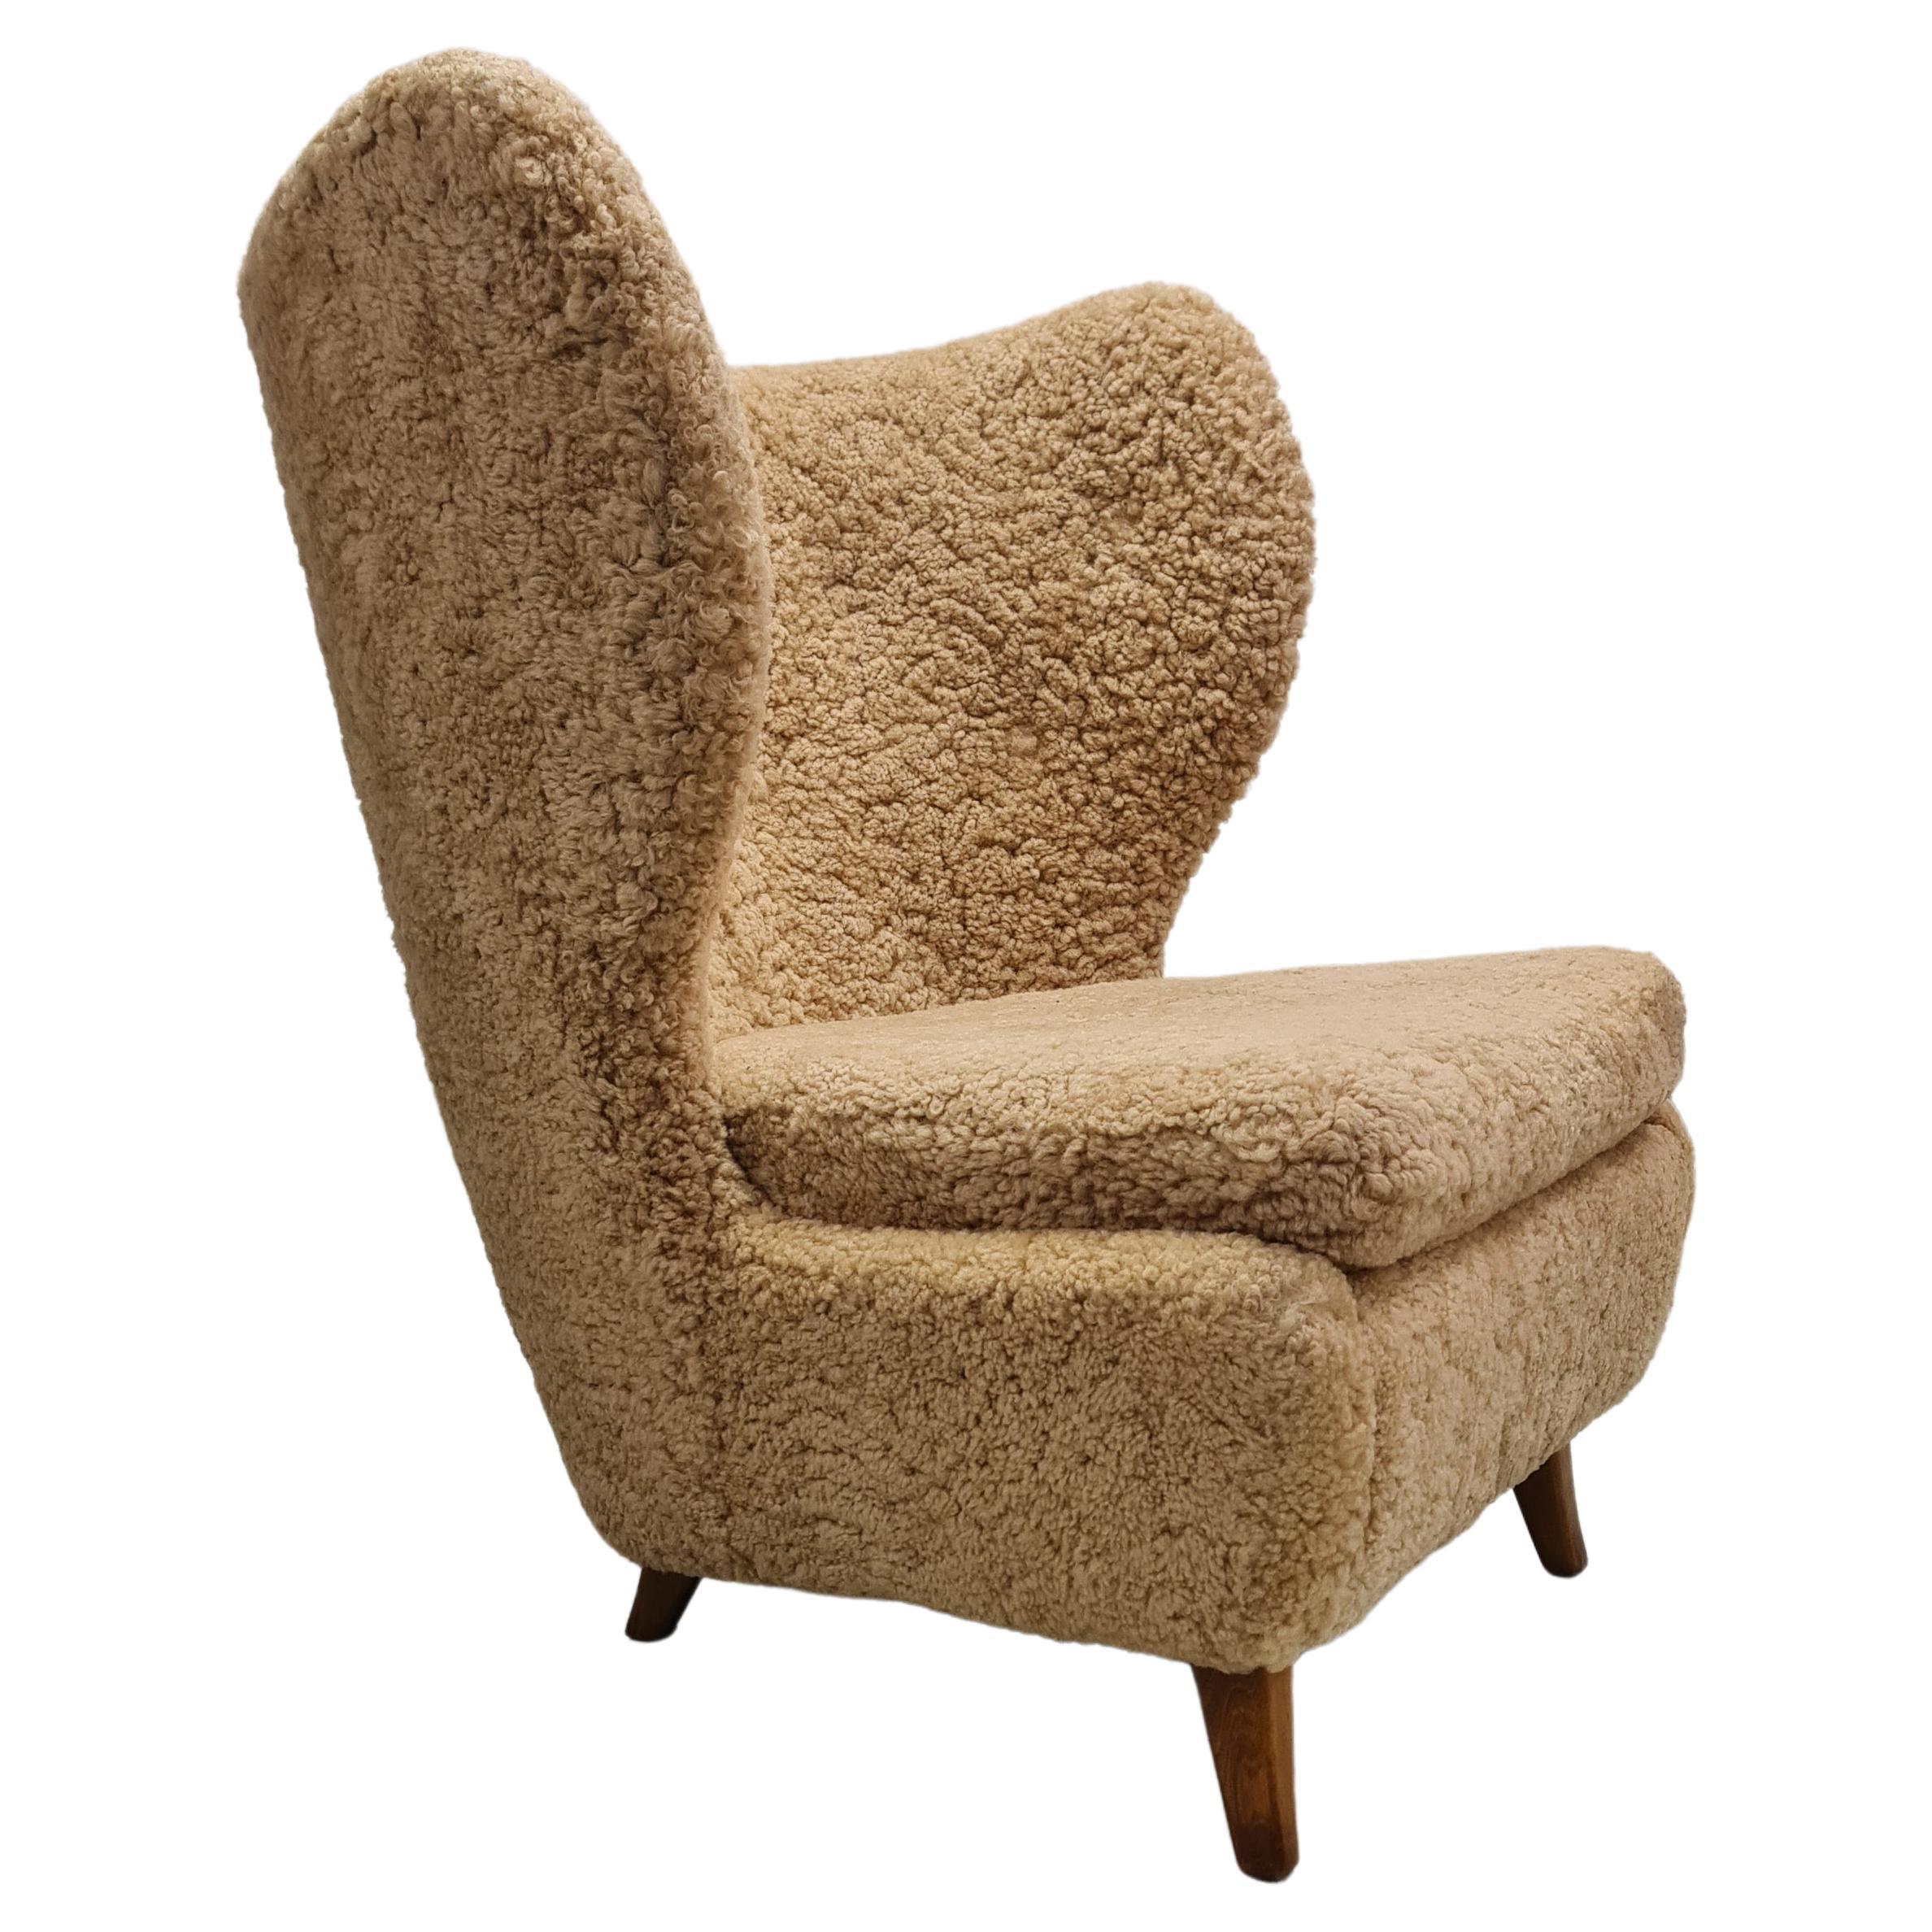 Marianne "The Knitting" Chair by Marianne Boman, Oy Boman Ab 1940s For Sale